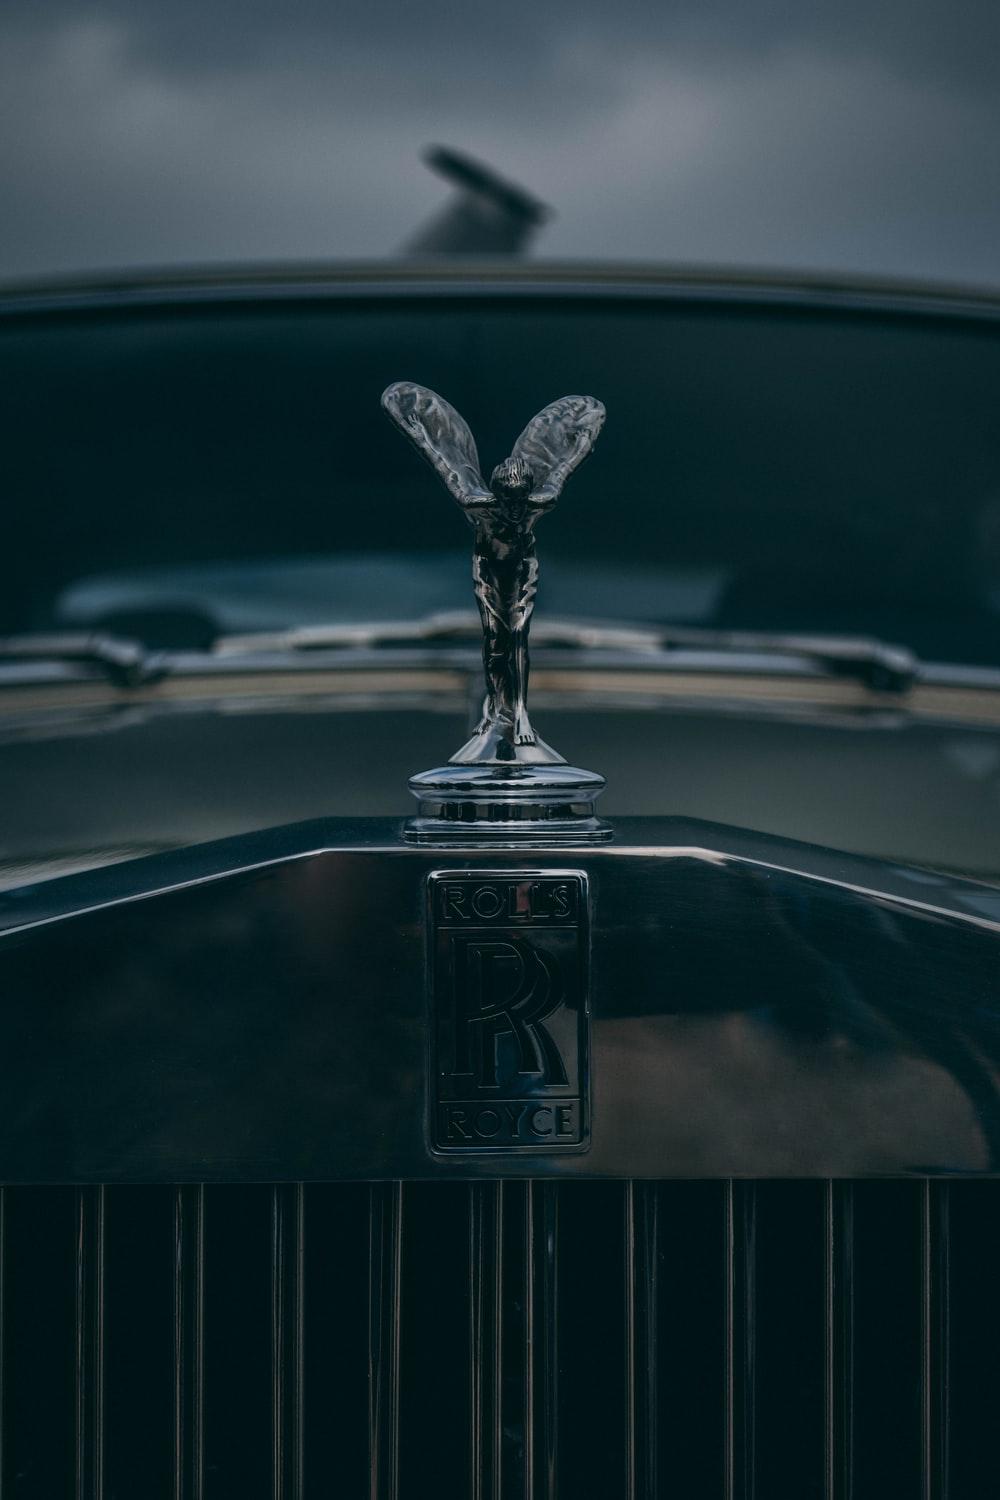 The Spirit Of Ecstasy Picture. Download Free Image